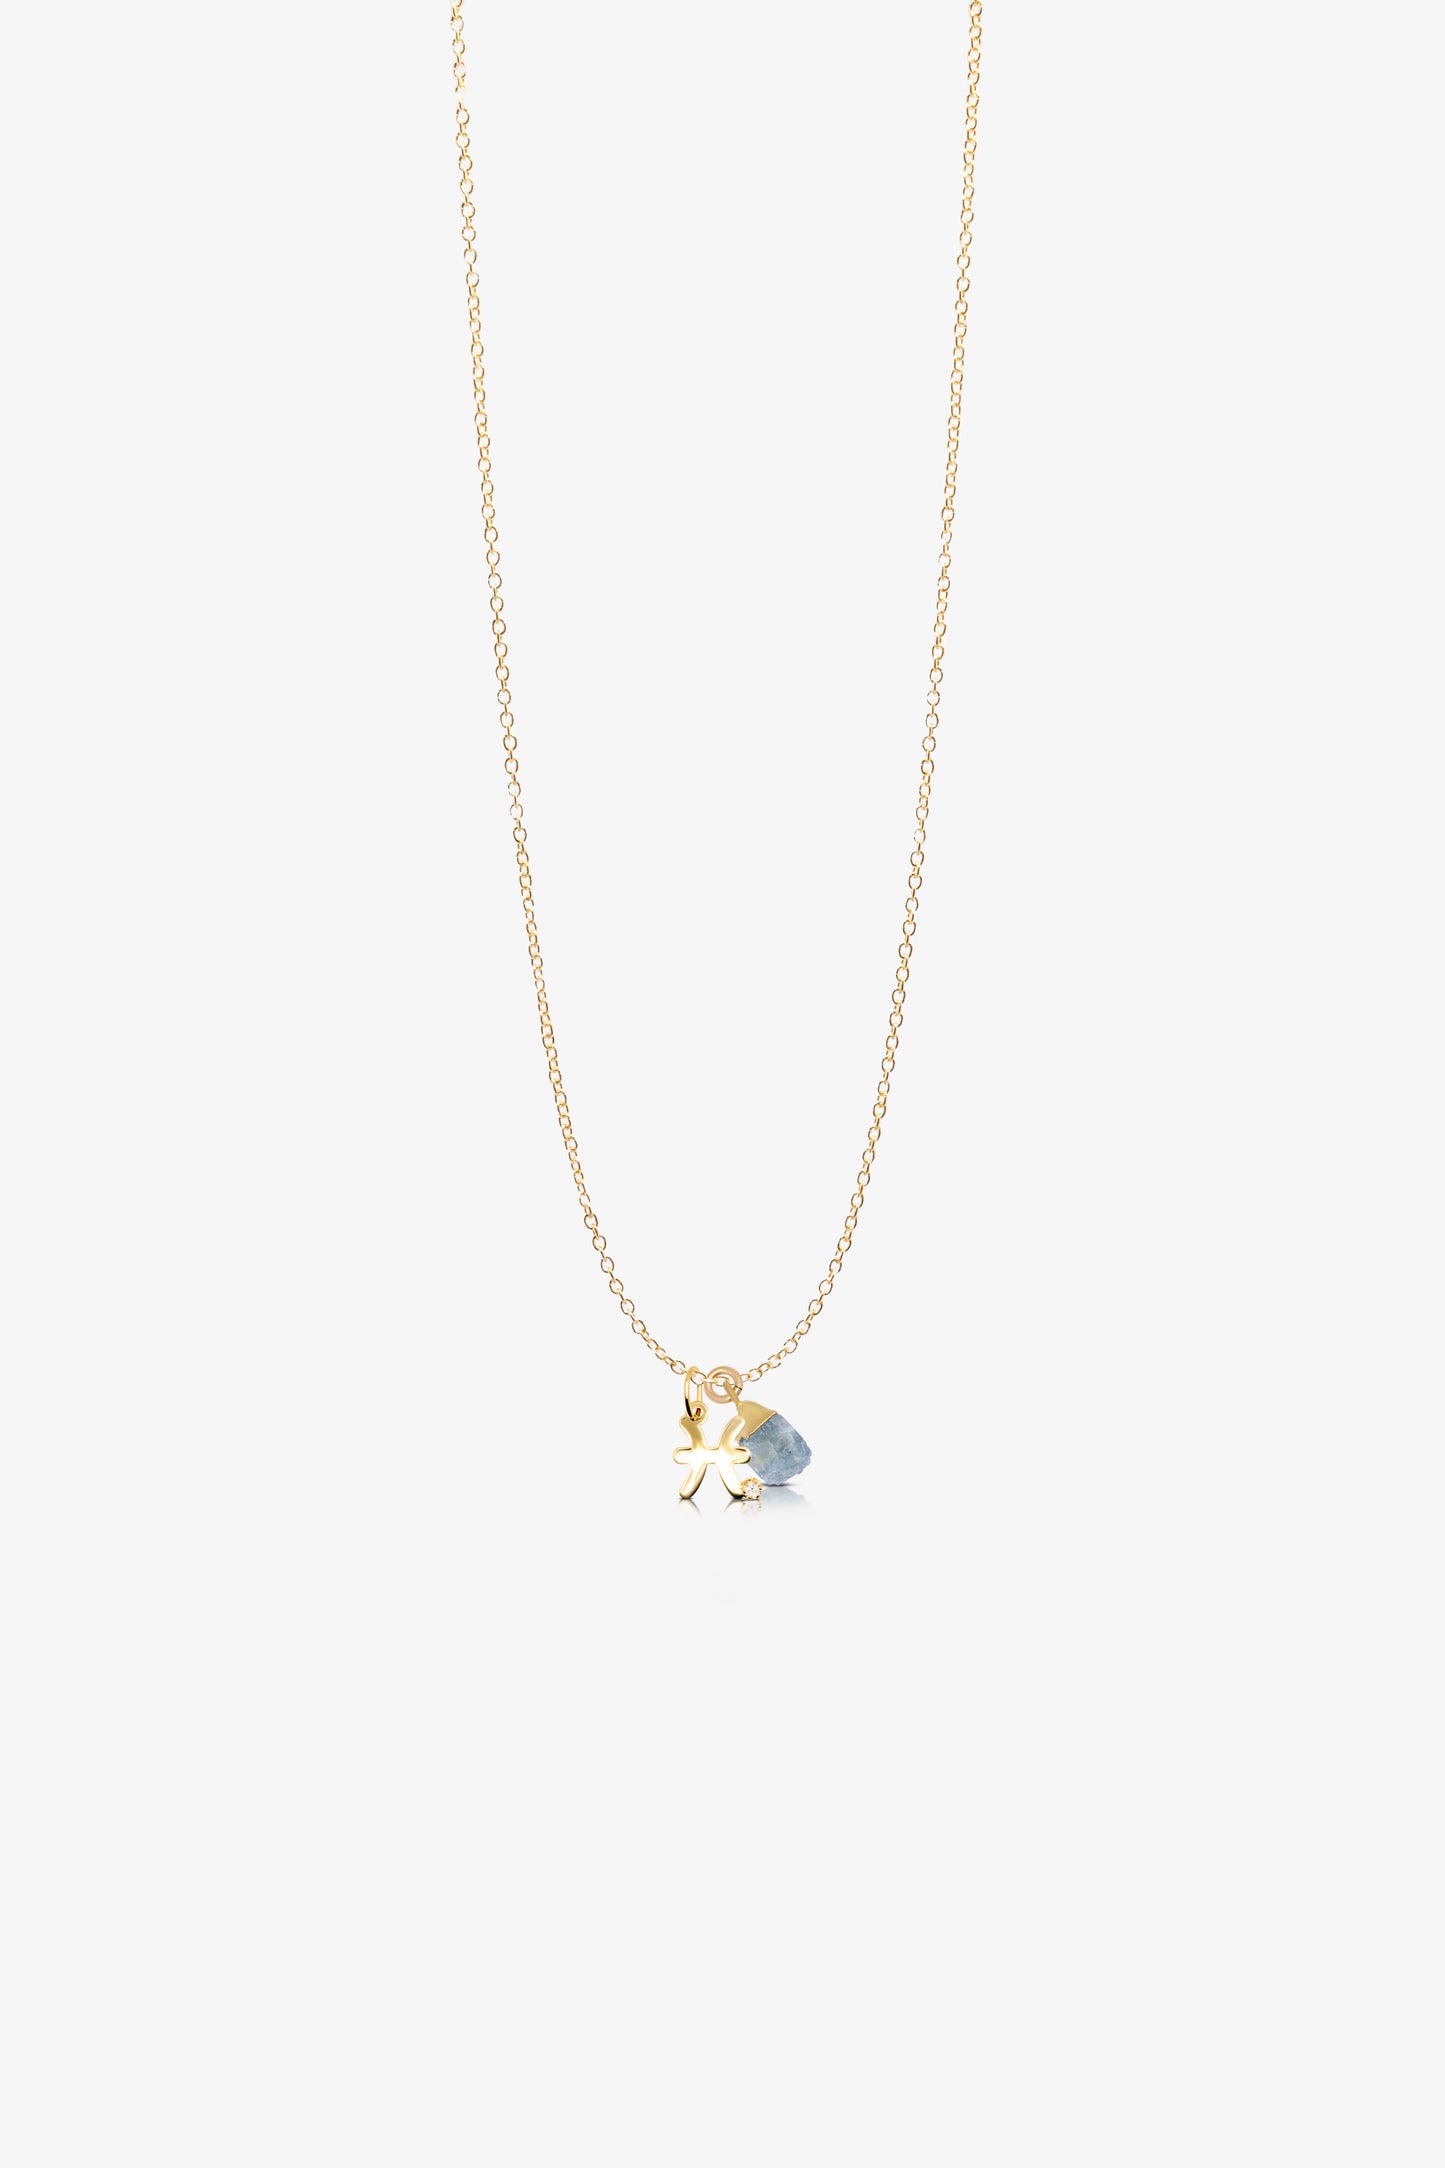 The Pisces' Angelic Aquamarine Birthstone With 14k Gold Necklace